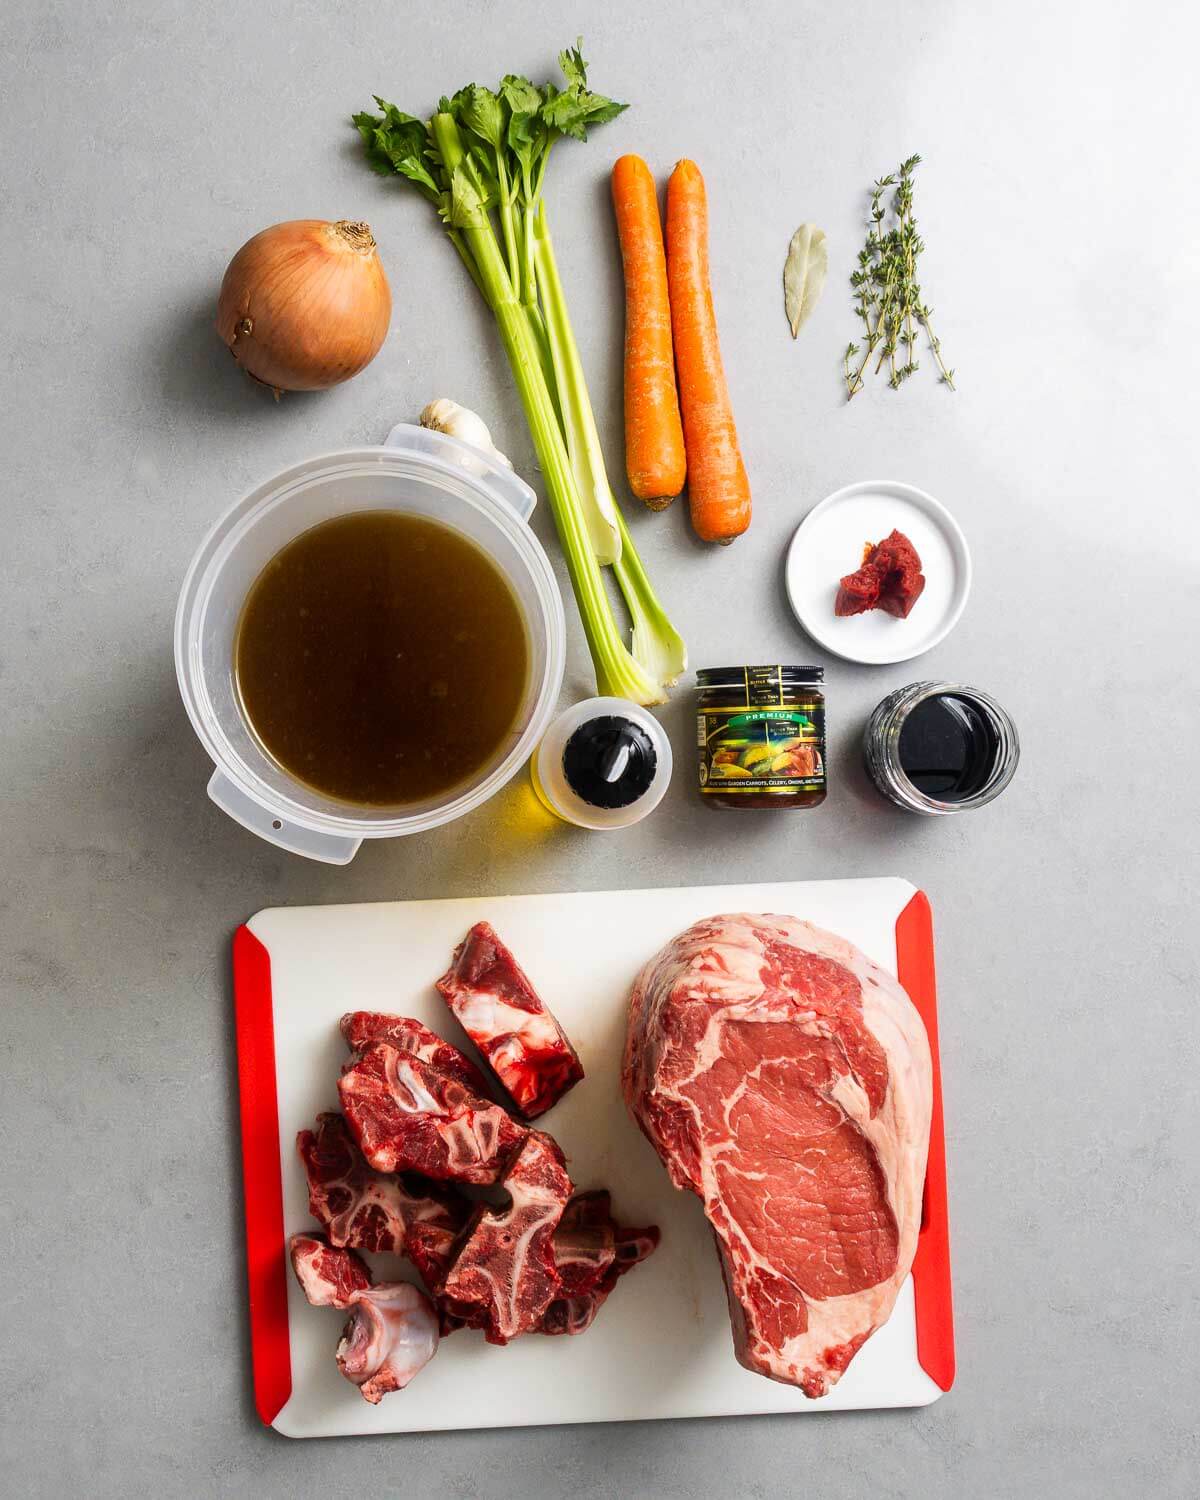 Ingredients shown: onion, celery, carrots, bay leaf, thyme, beef stock, olive oil, beef base, red wine, tomato paste, beef bones, and prime rib.